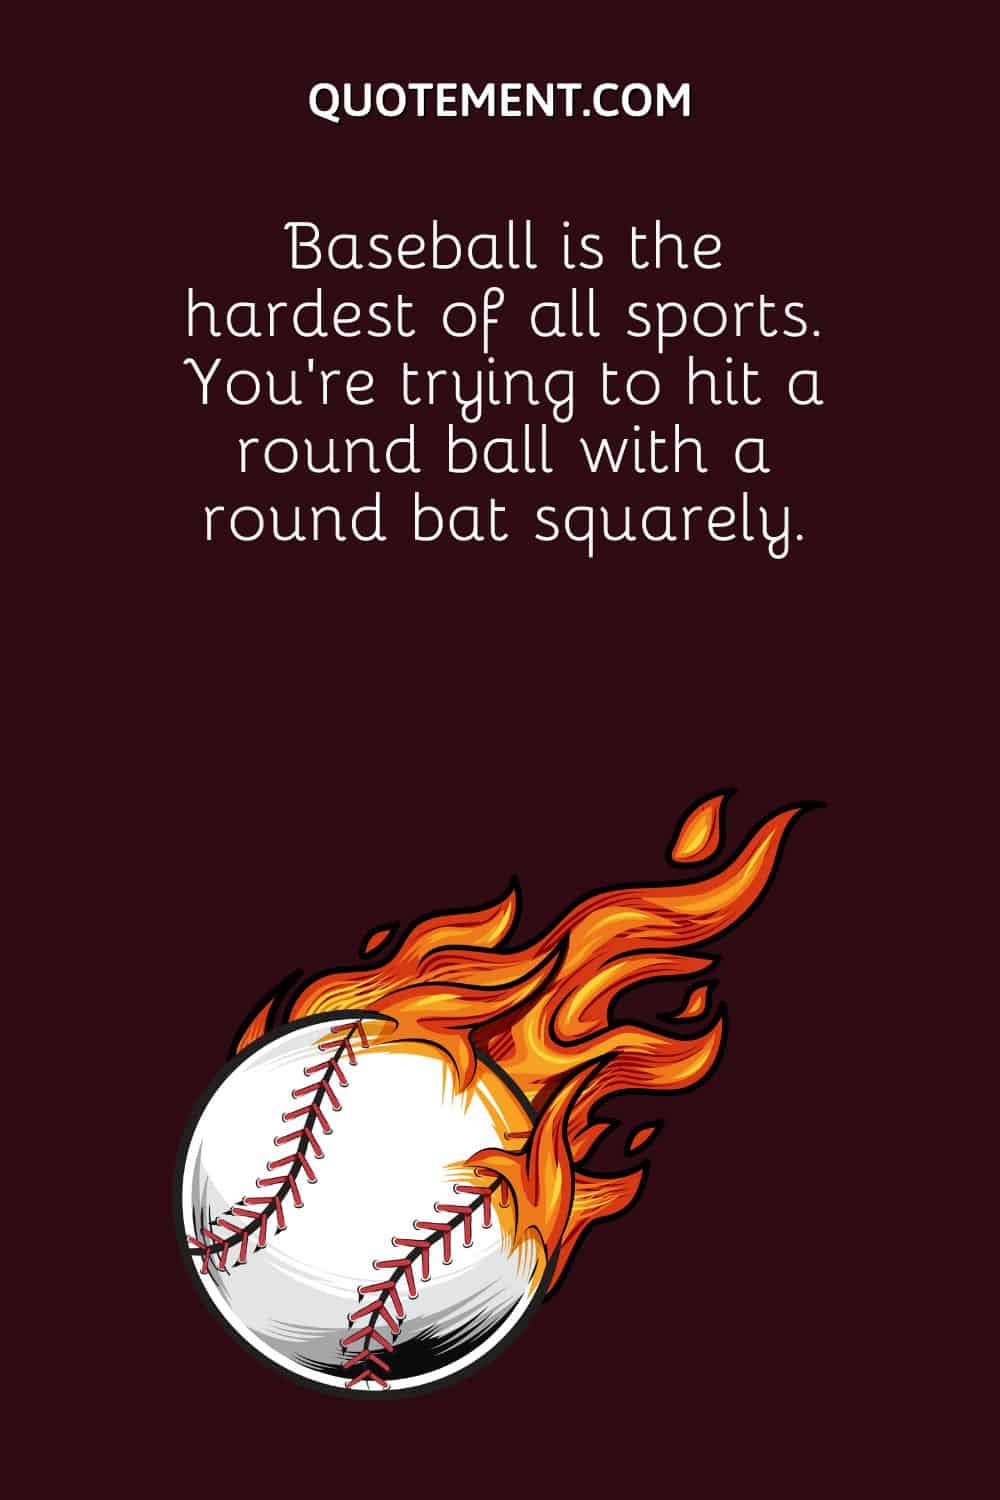 Baseball is the hardest of all sports